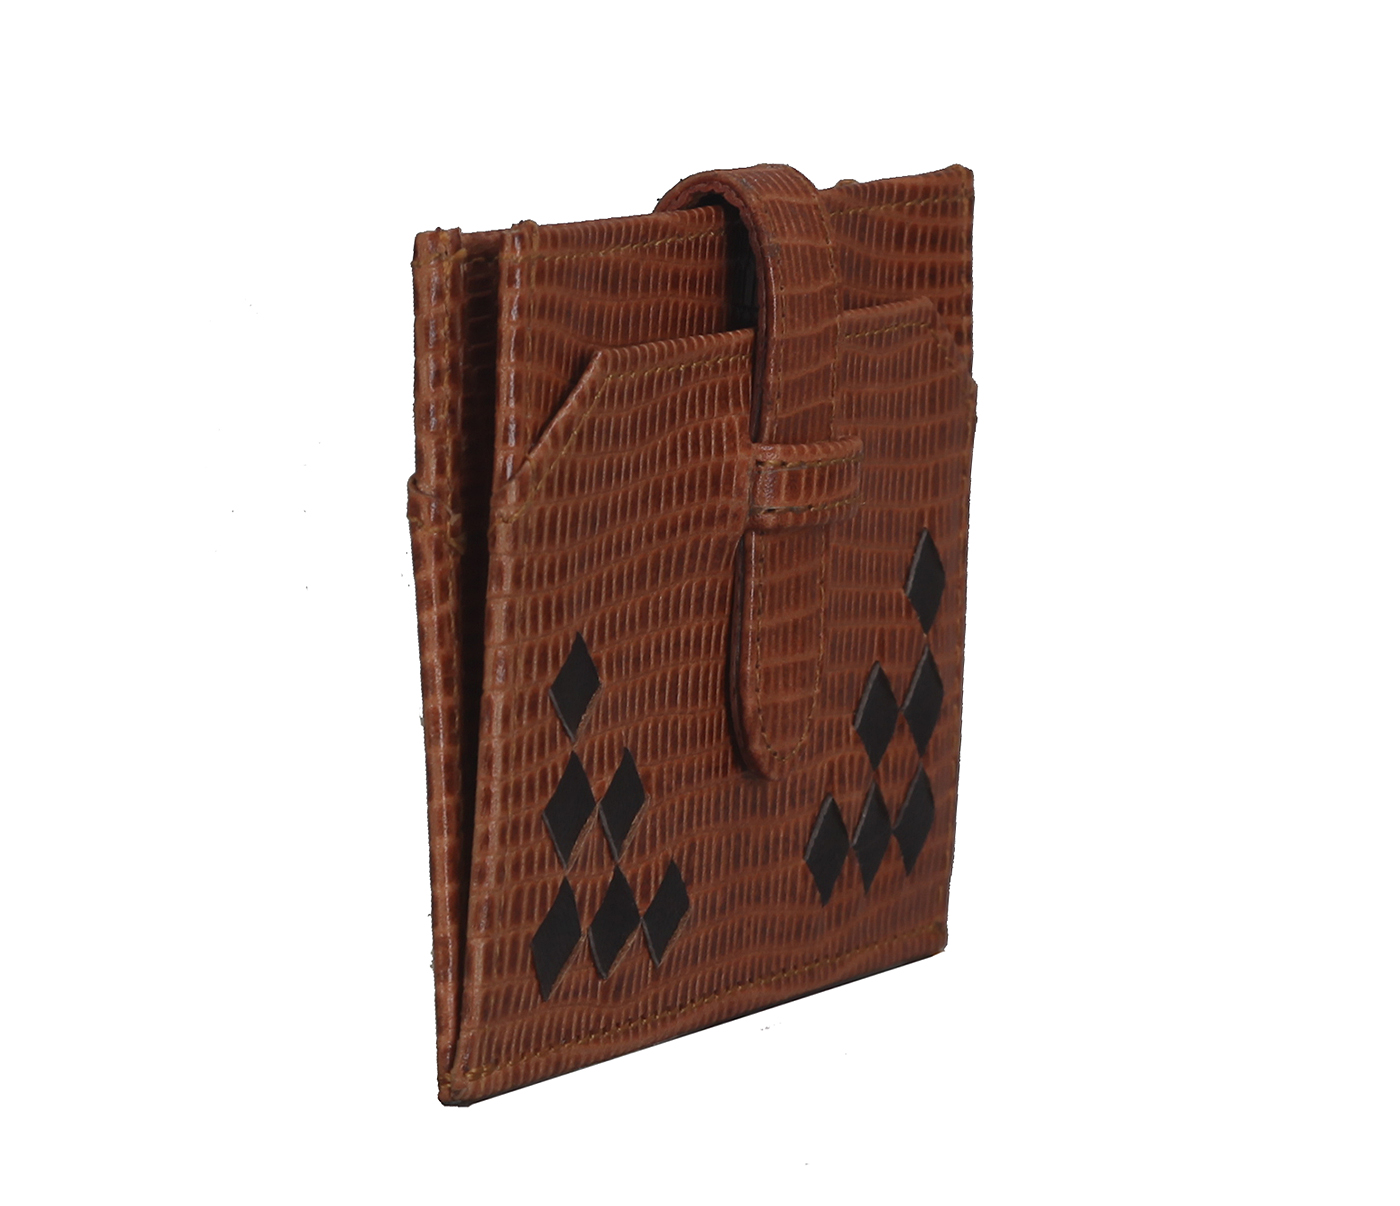 W272--Credit Card And Business Card Holder in Genuine leather - Tan/Brown